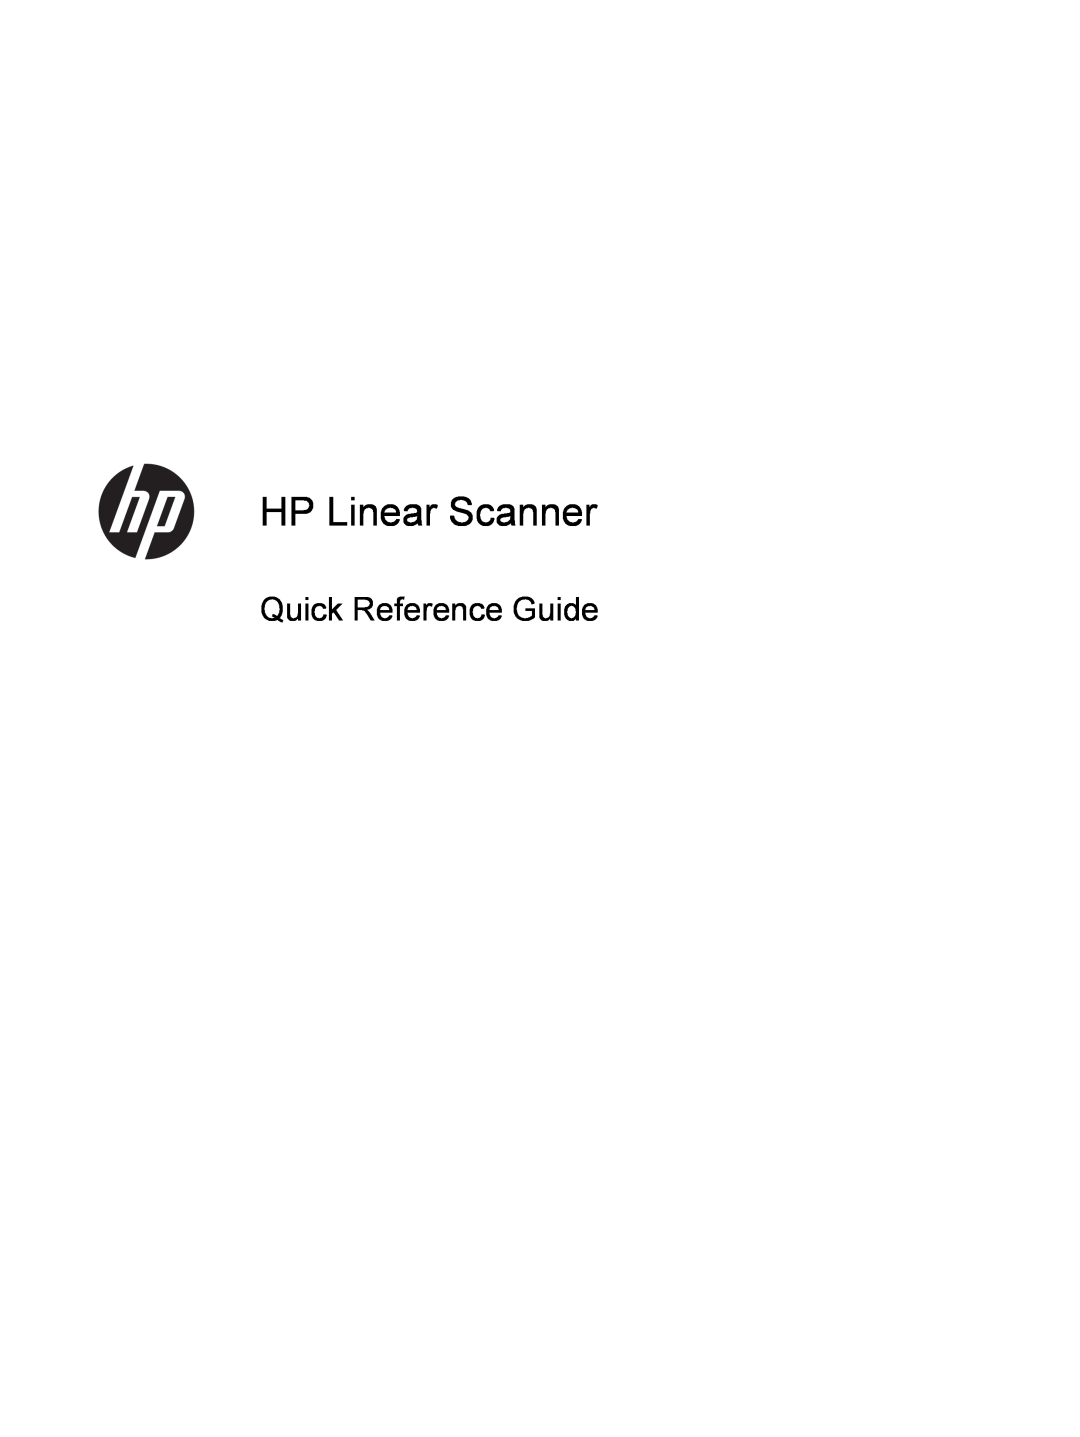 HP rp5800 Base Model Retail System, rp5800 Retail System manual HP Linear Scanner, Quick Reference Guide 